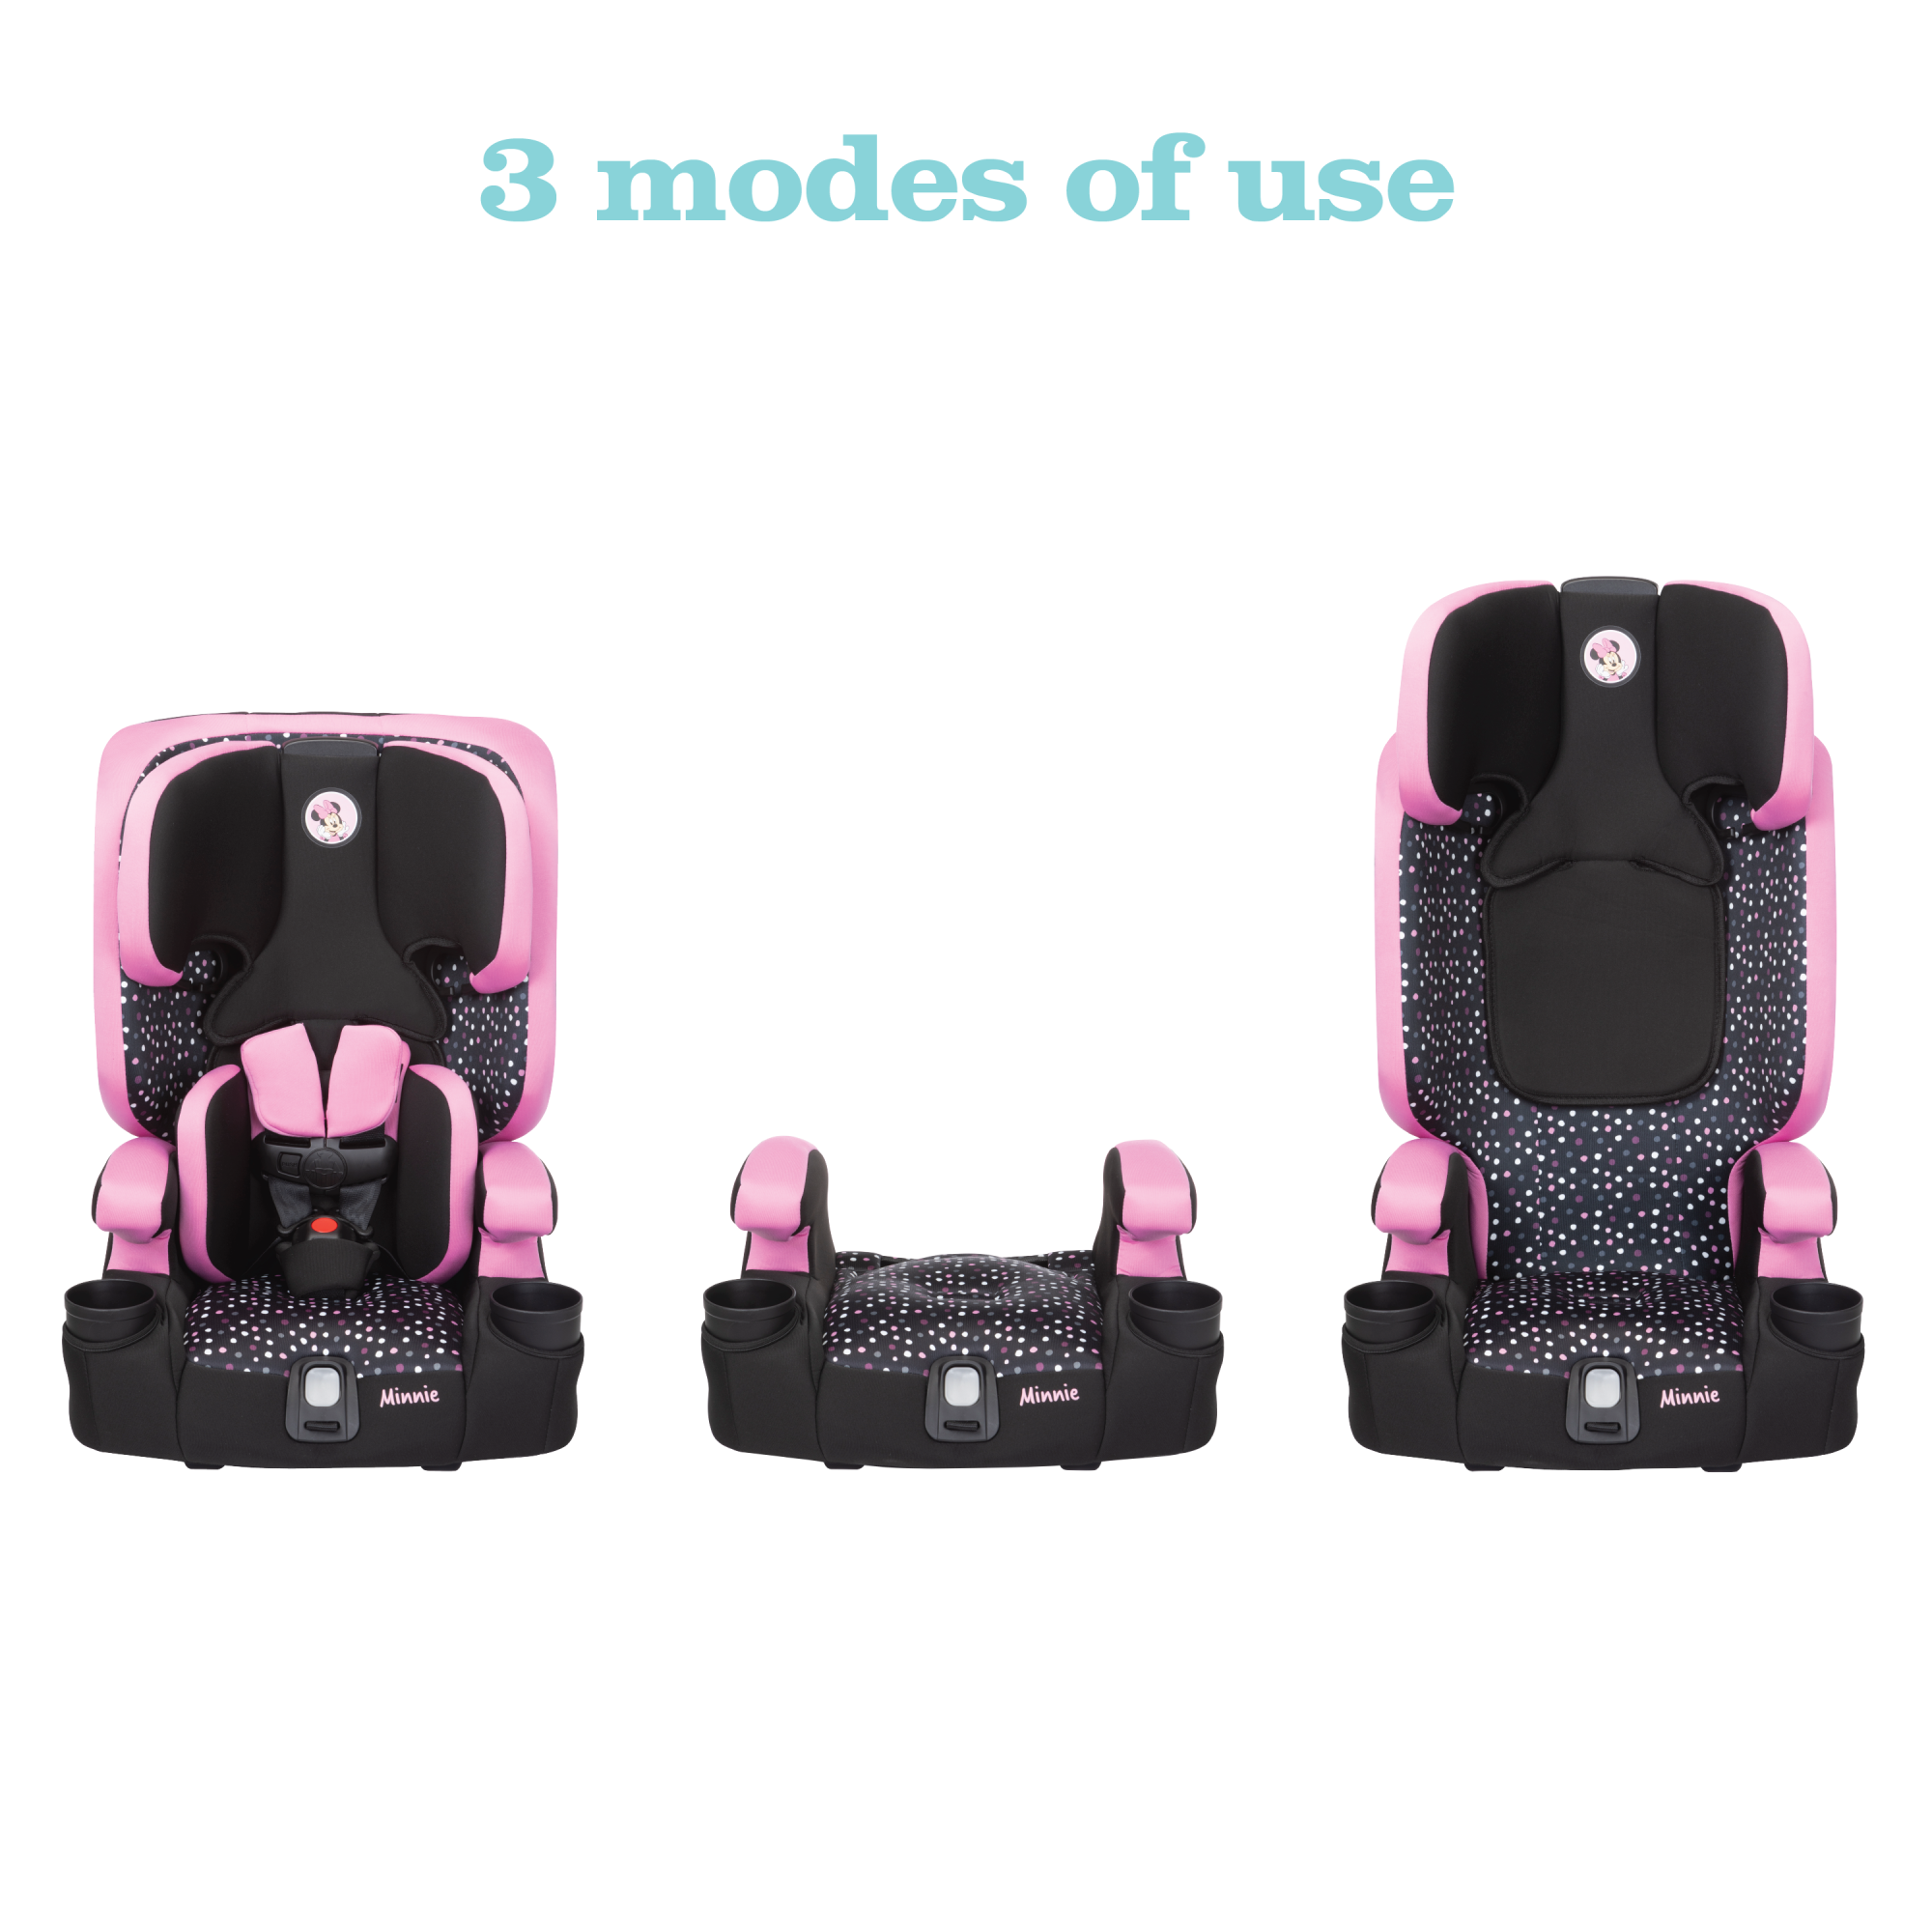 Disney Baby MagicSquad 3-in-1 Harness Booster Car Seat - Minnie Dot Party - 3 modes of use